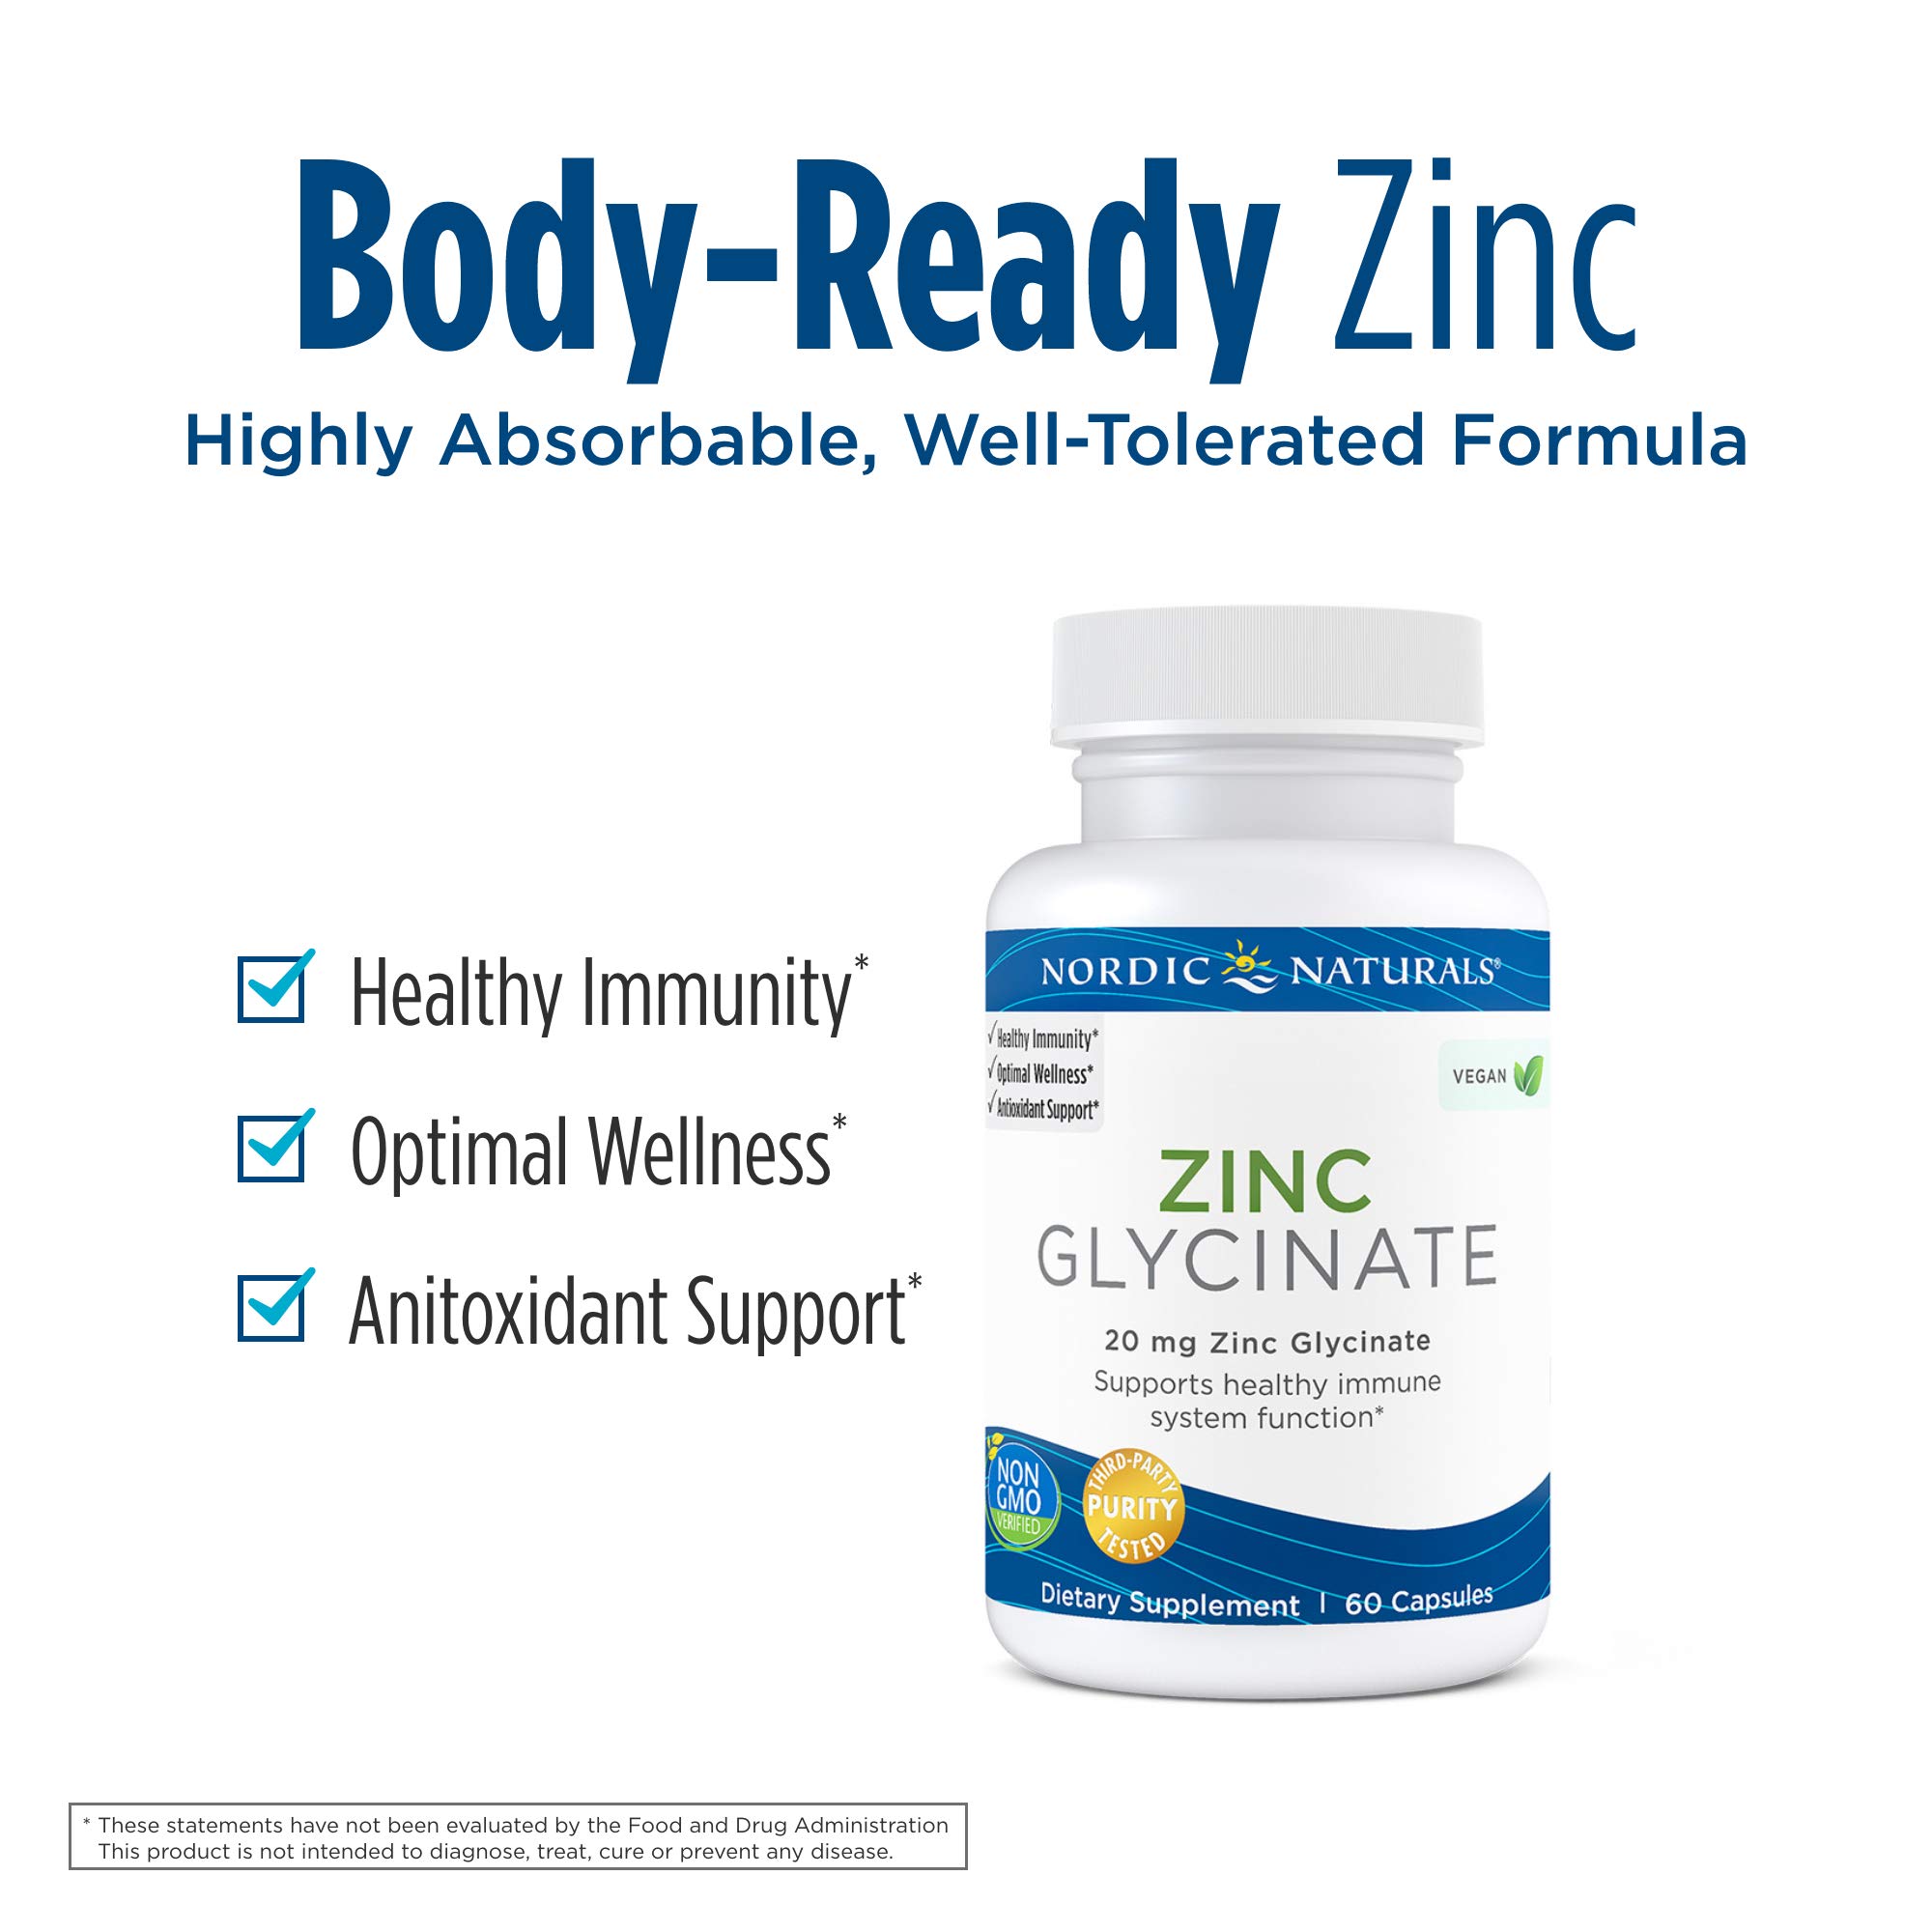 Nordic Naturals Zinc Glycinate - 60 Capsules - 20 mg Highly Absorbable Zinc Glycinate - Optimal Wellness - Non-GMO, Gluten Free, Vegan - 30 Servings